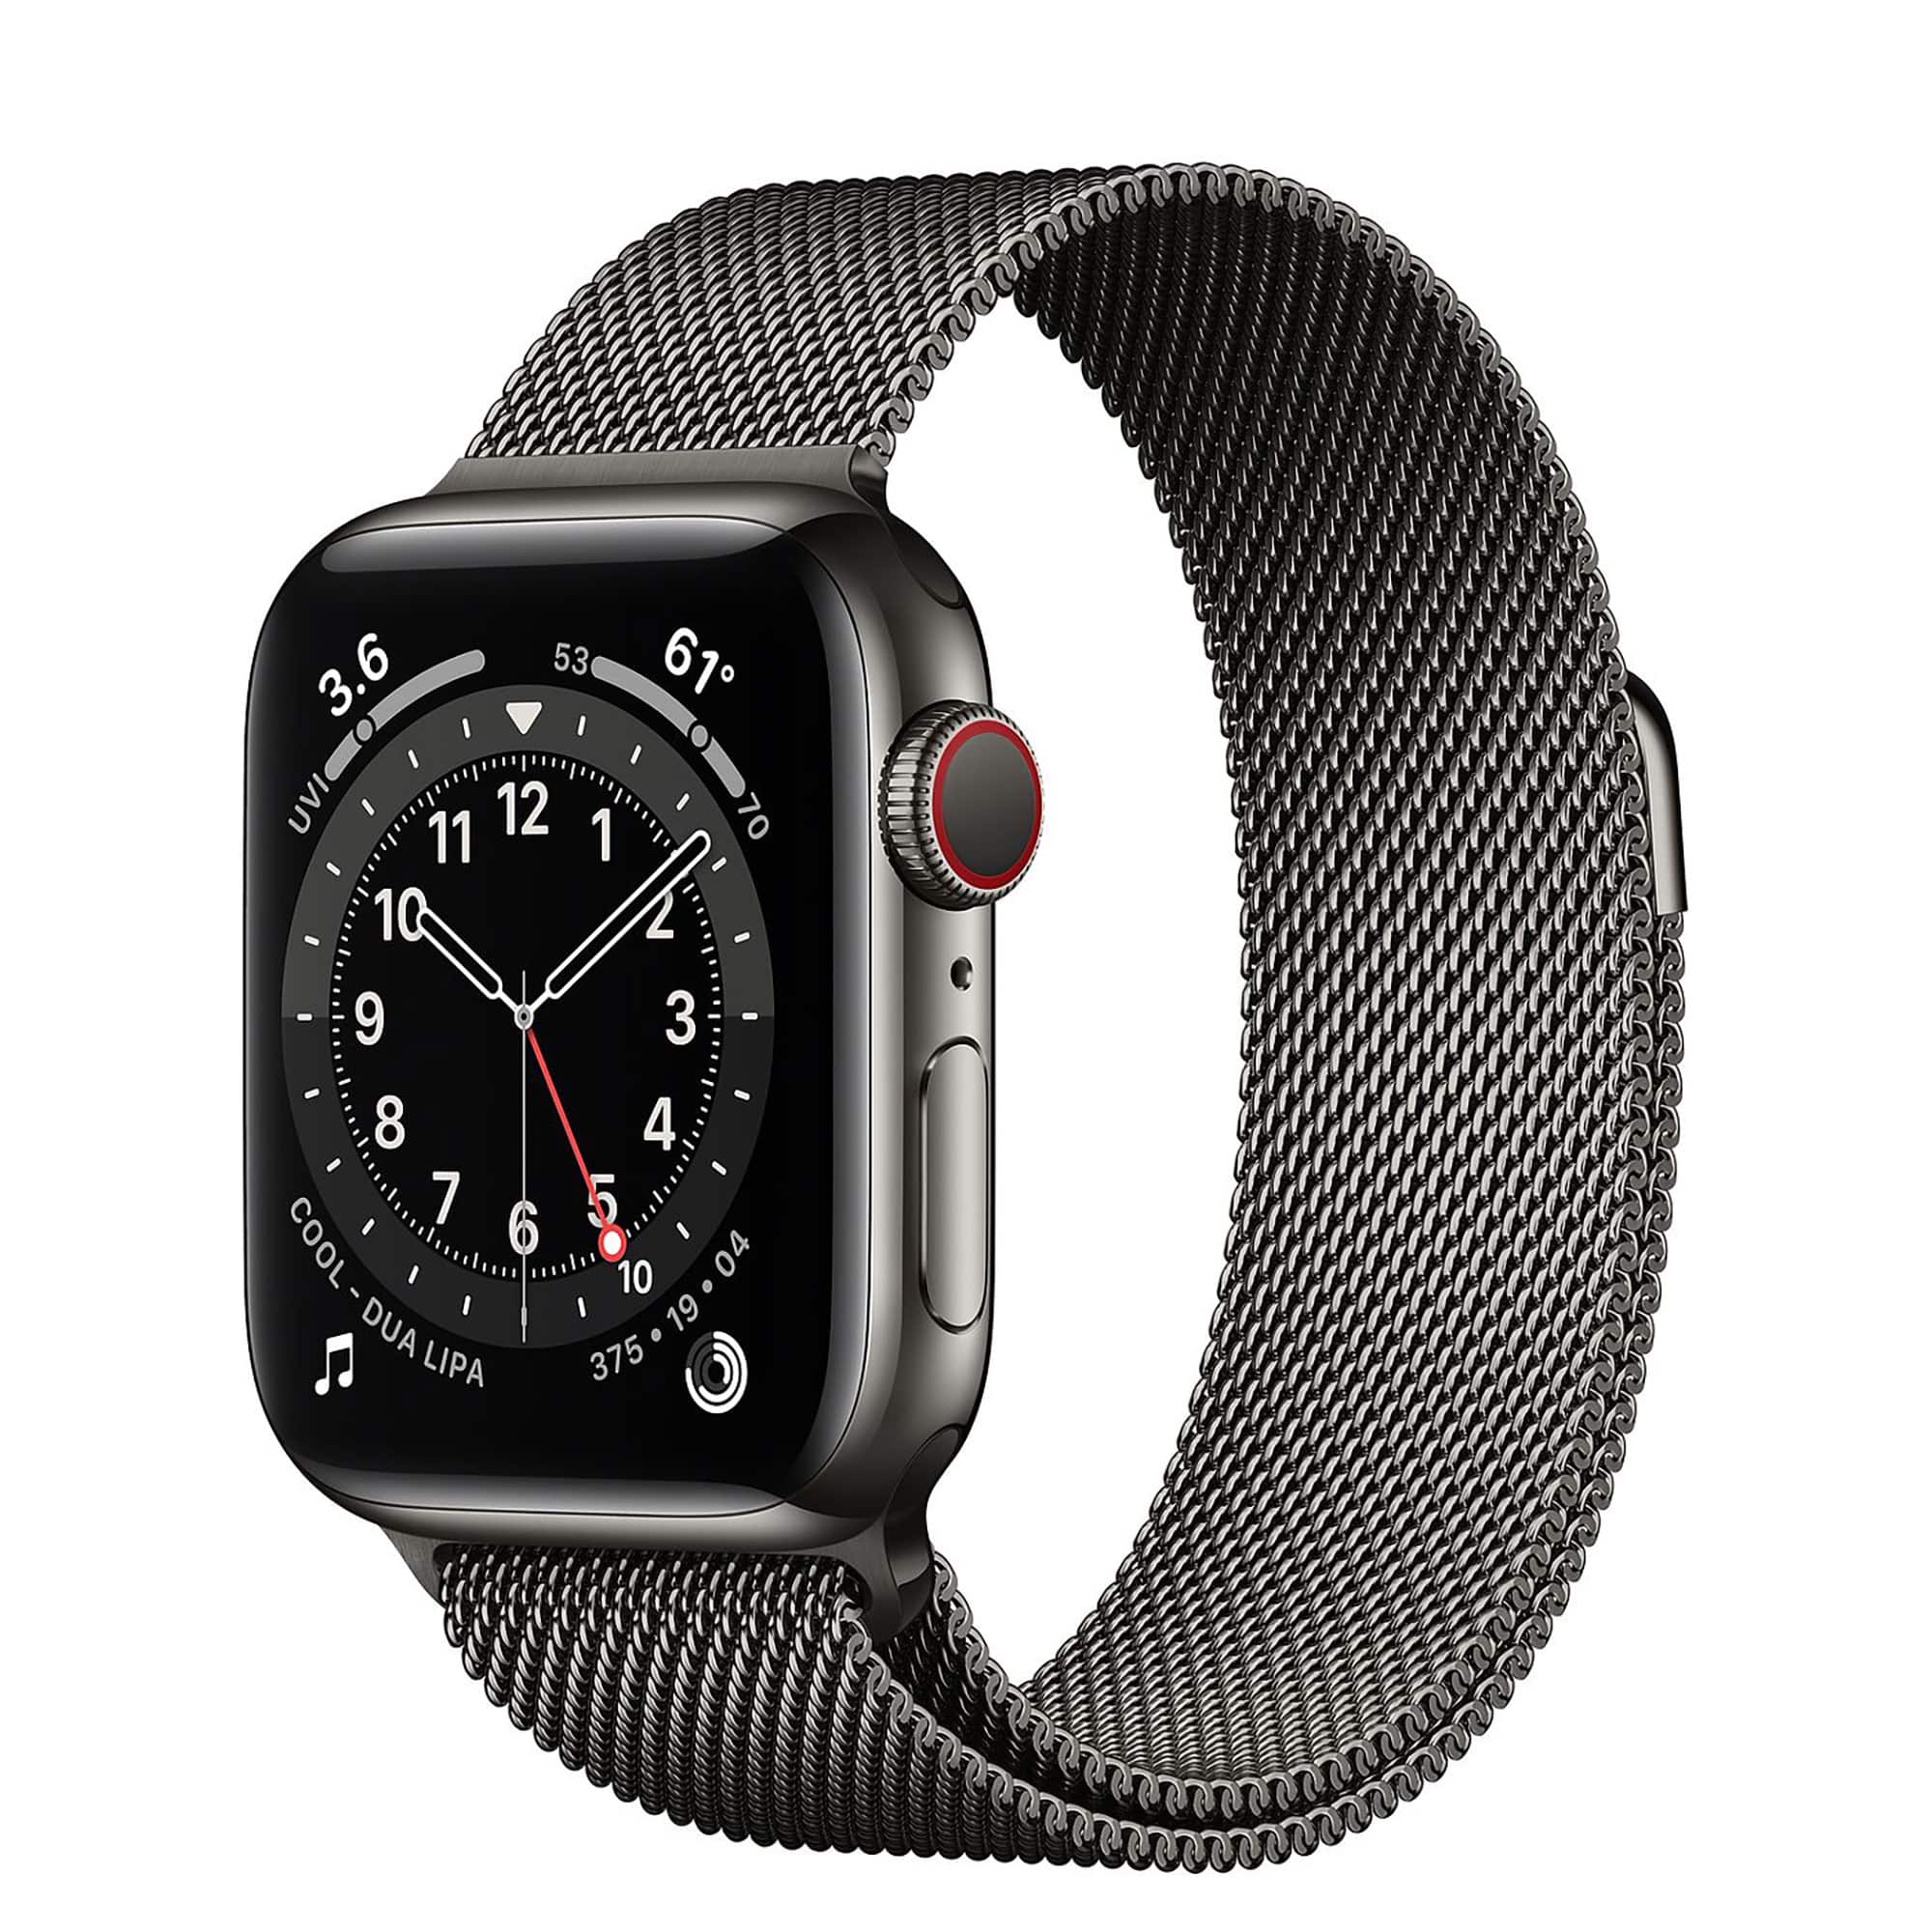 Apple Watch Graphite Stainless Steel